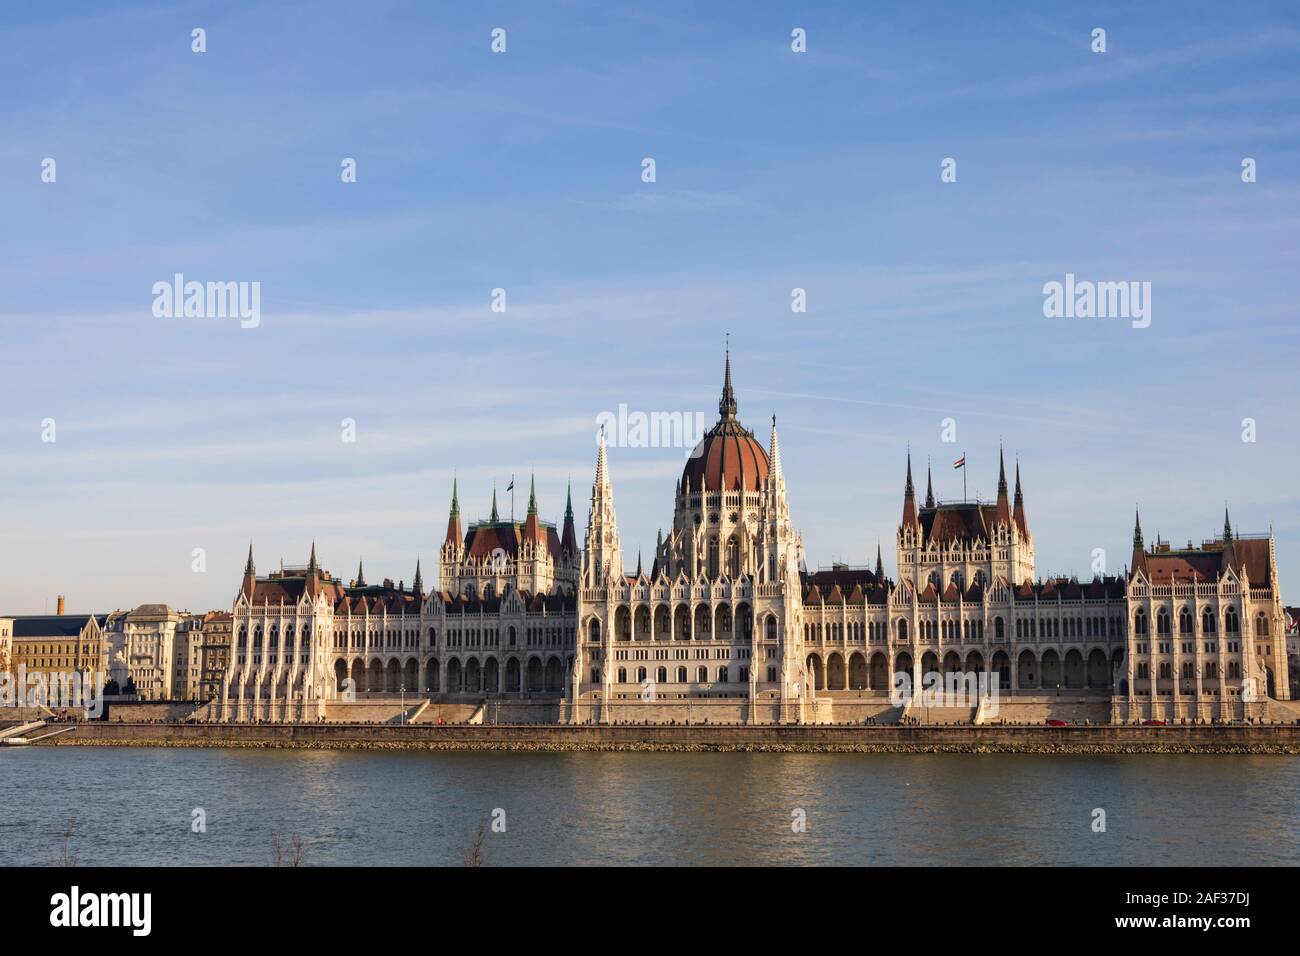 The Hungarian Parliament Building, Orszaghaz, on the River Danube. Winter in Budapest, Hungary. December 2019 Stock Photo